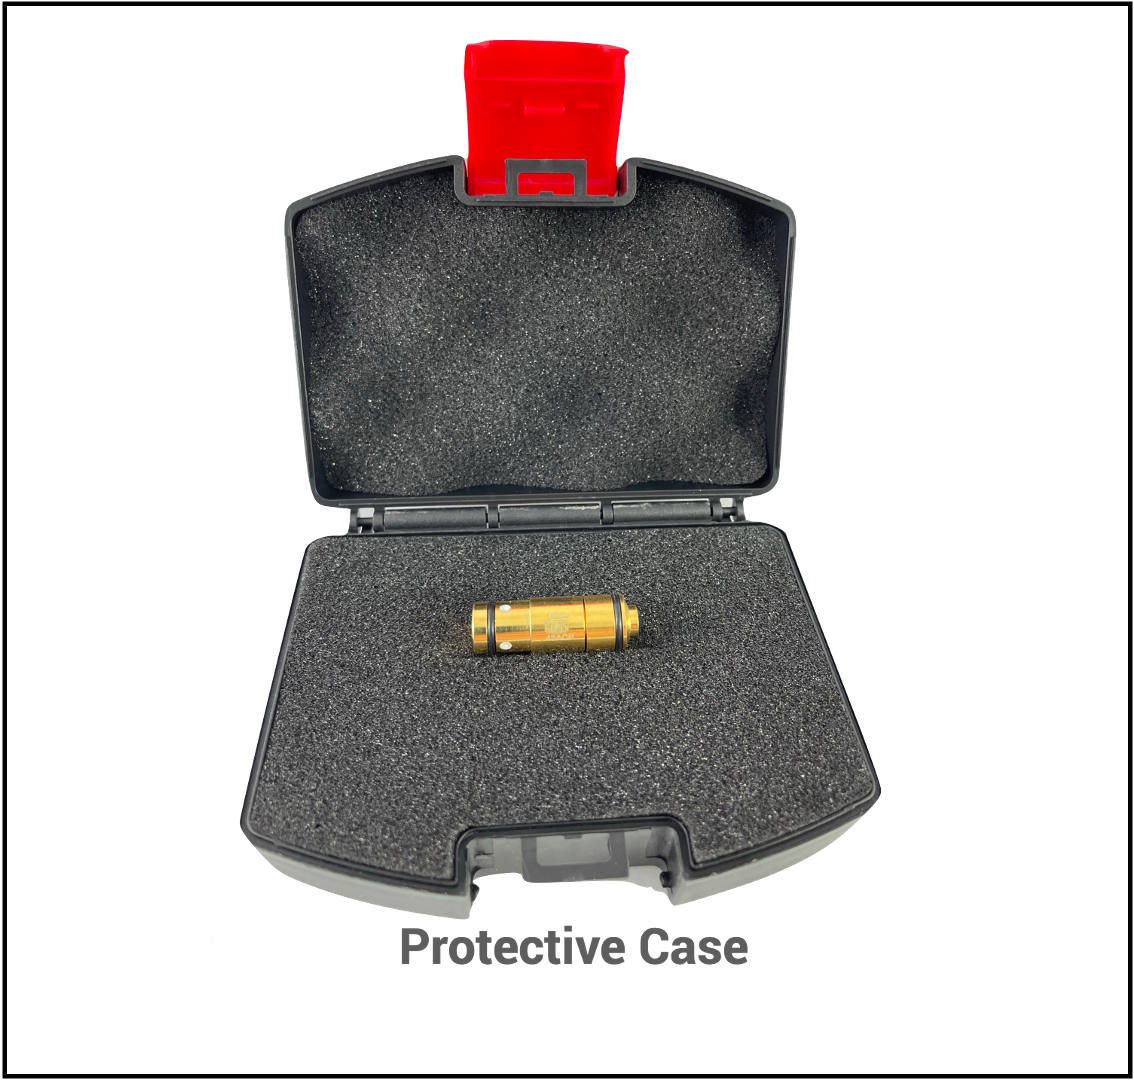 Protective case with cartridge